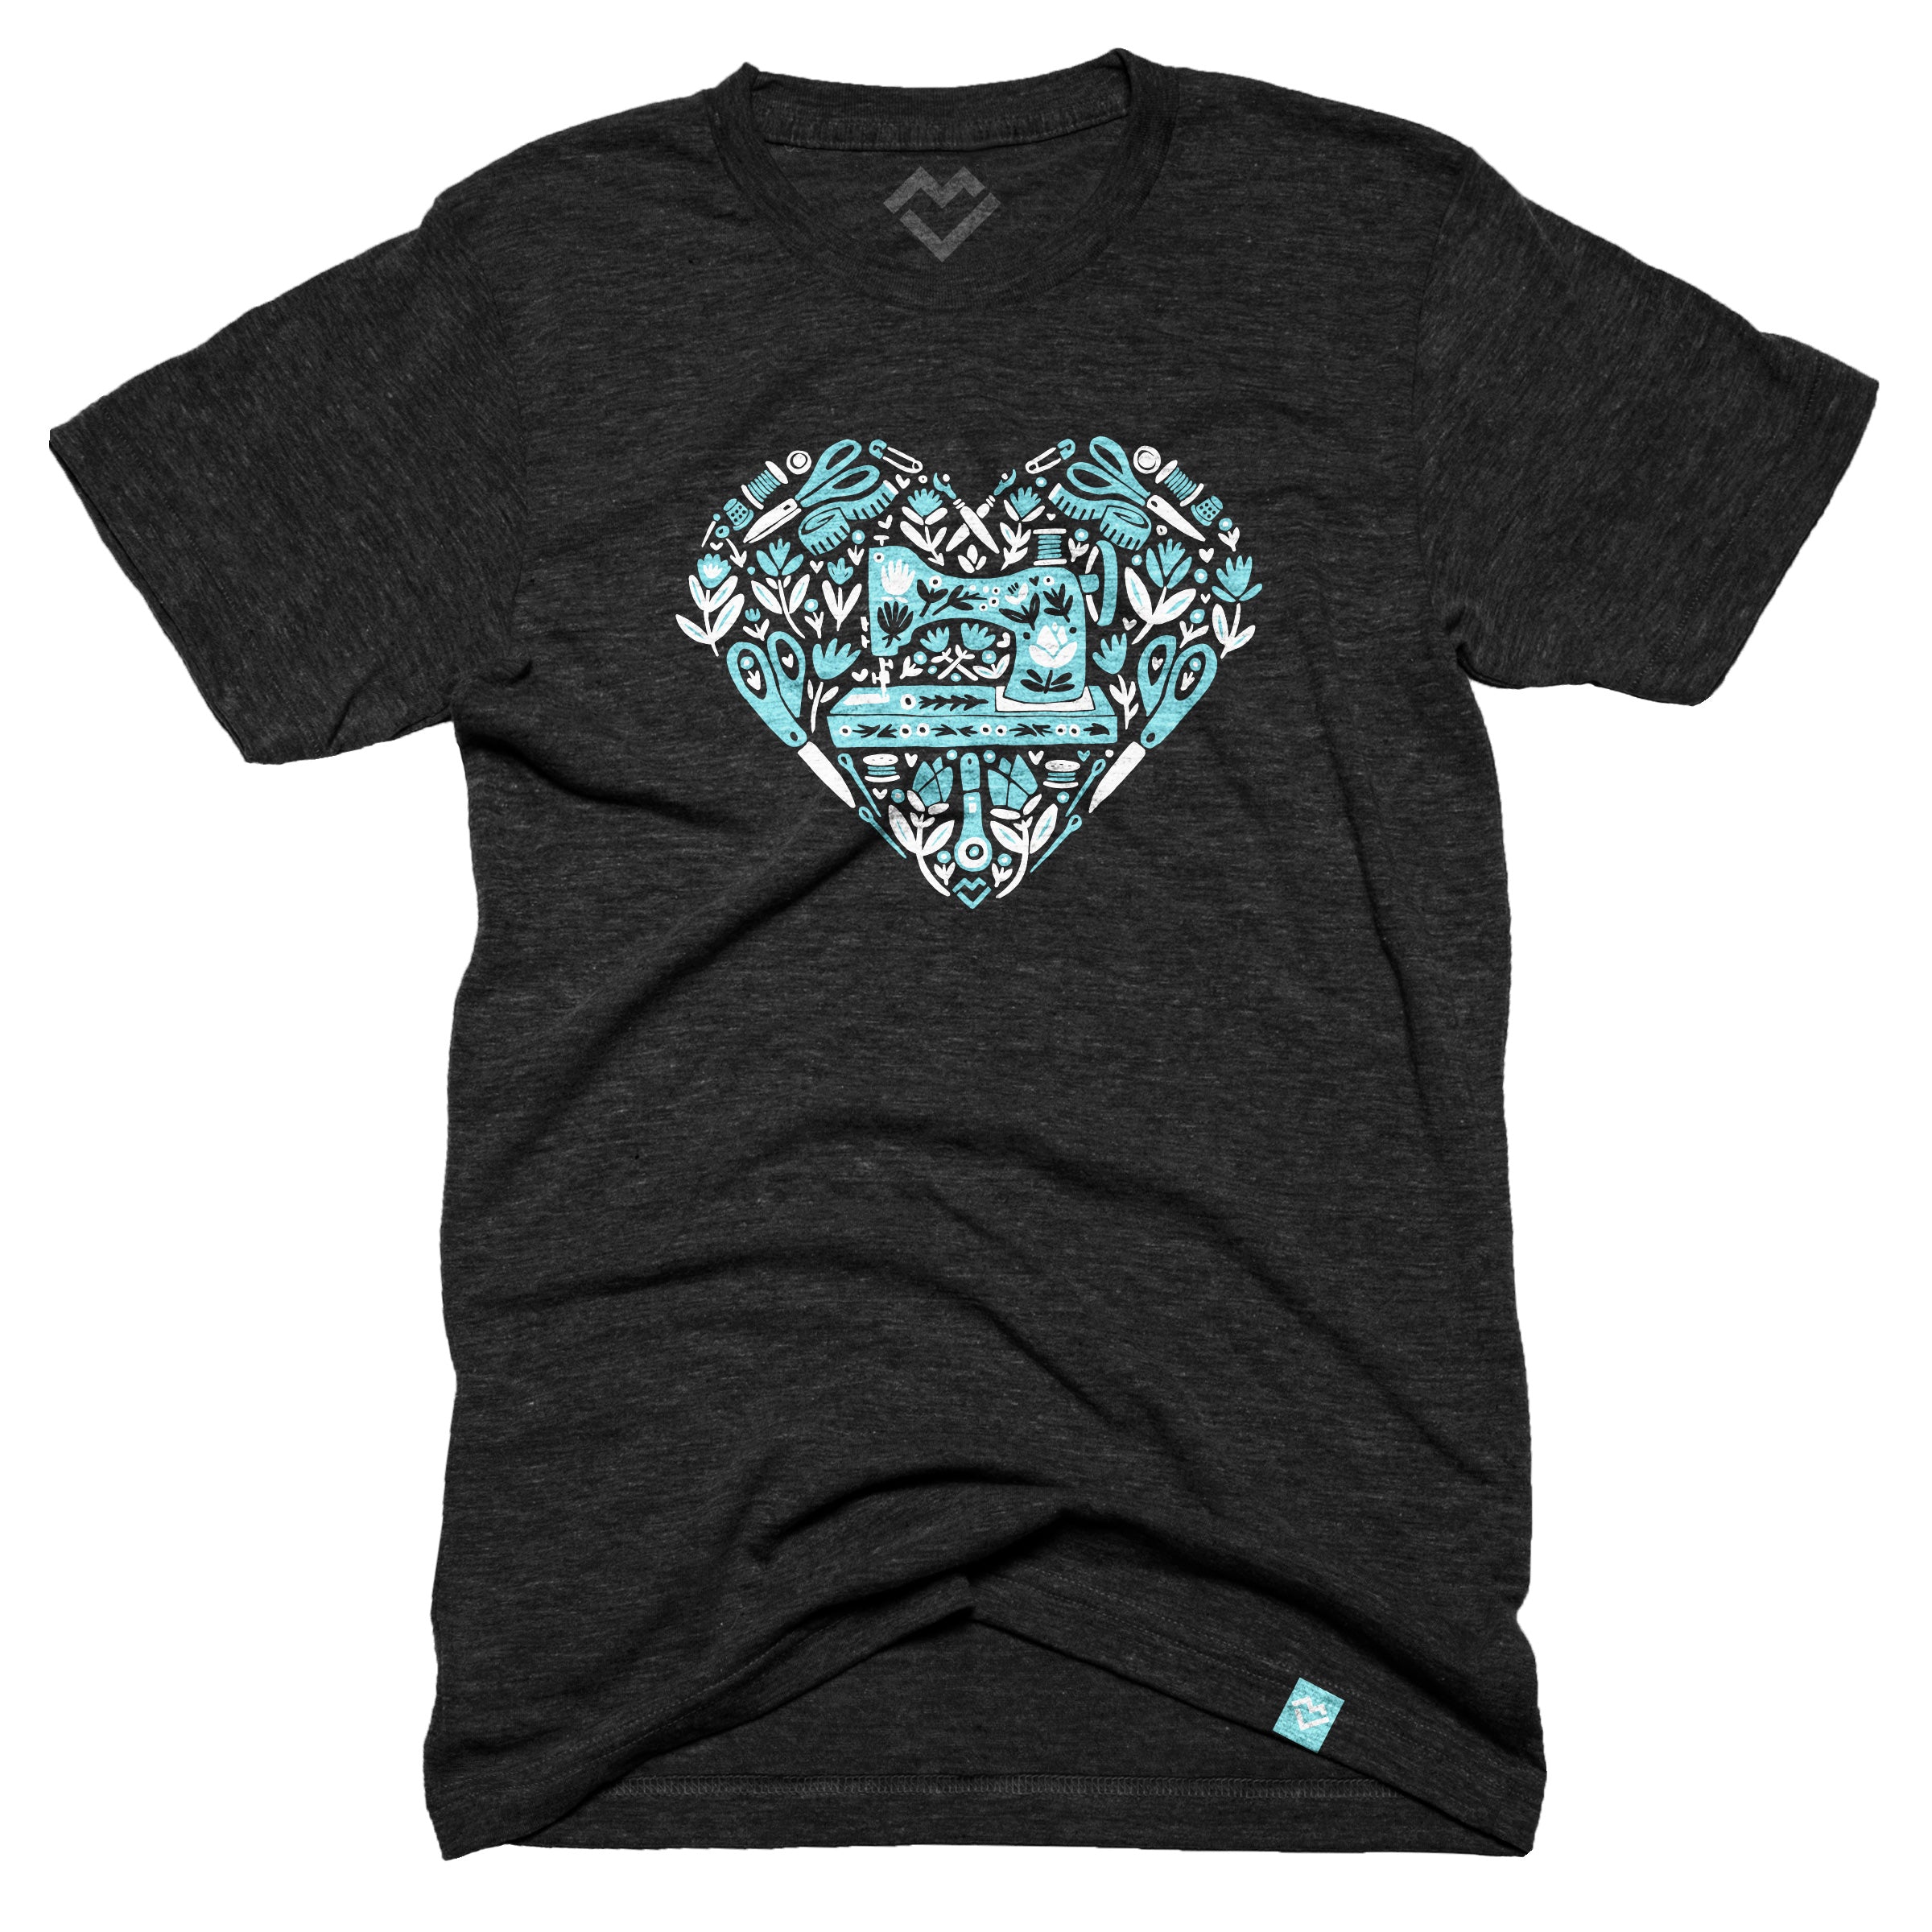 Creating the Sewing Hearts t-shirt design – Stately Type